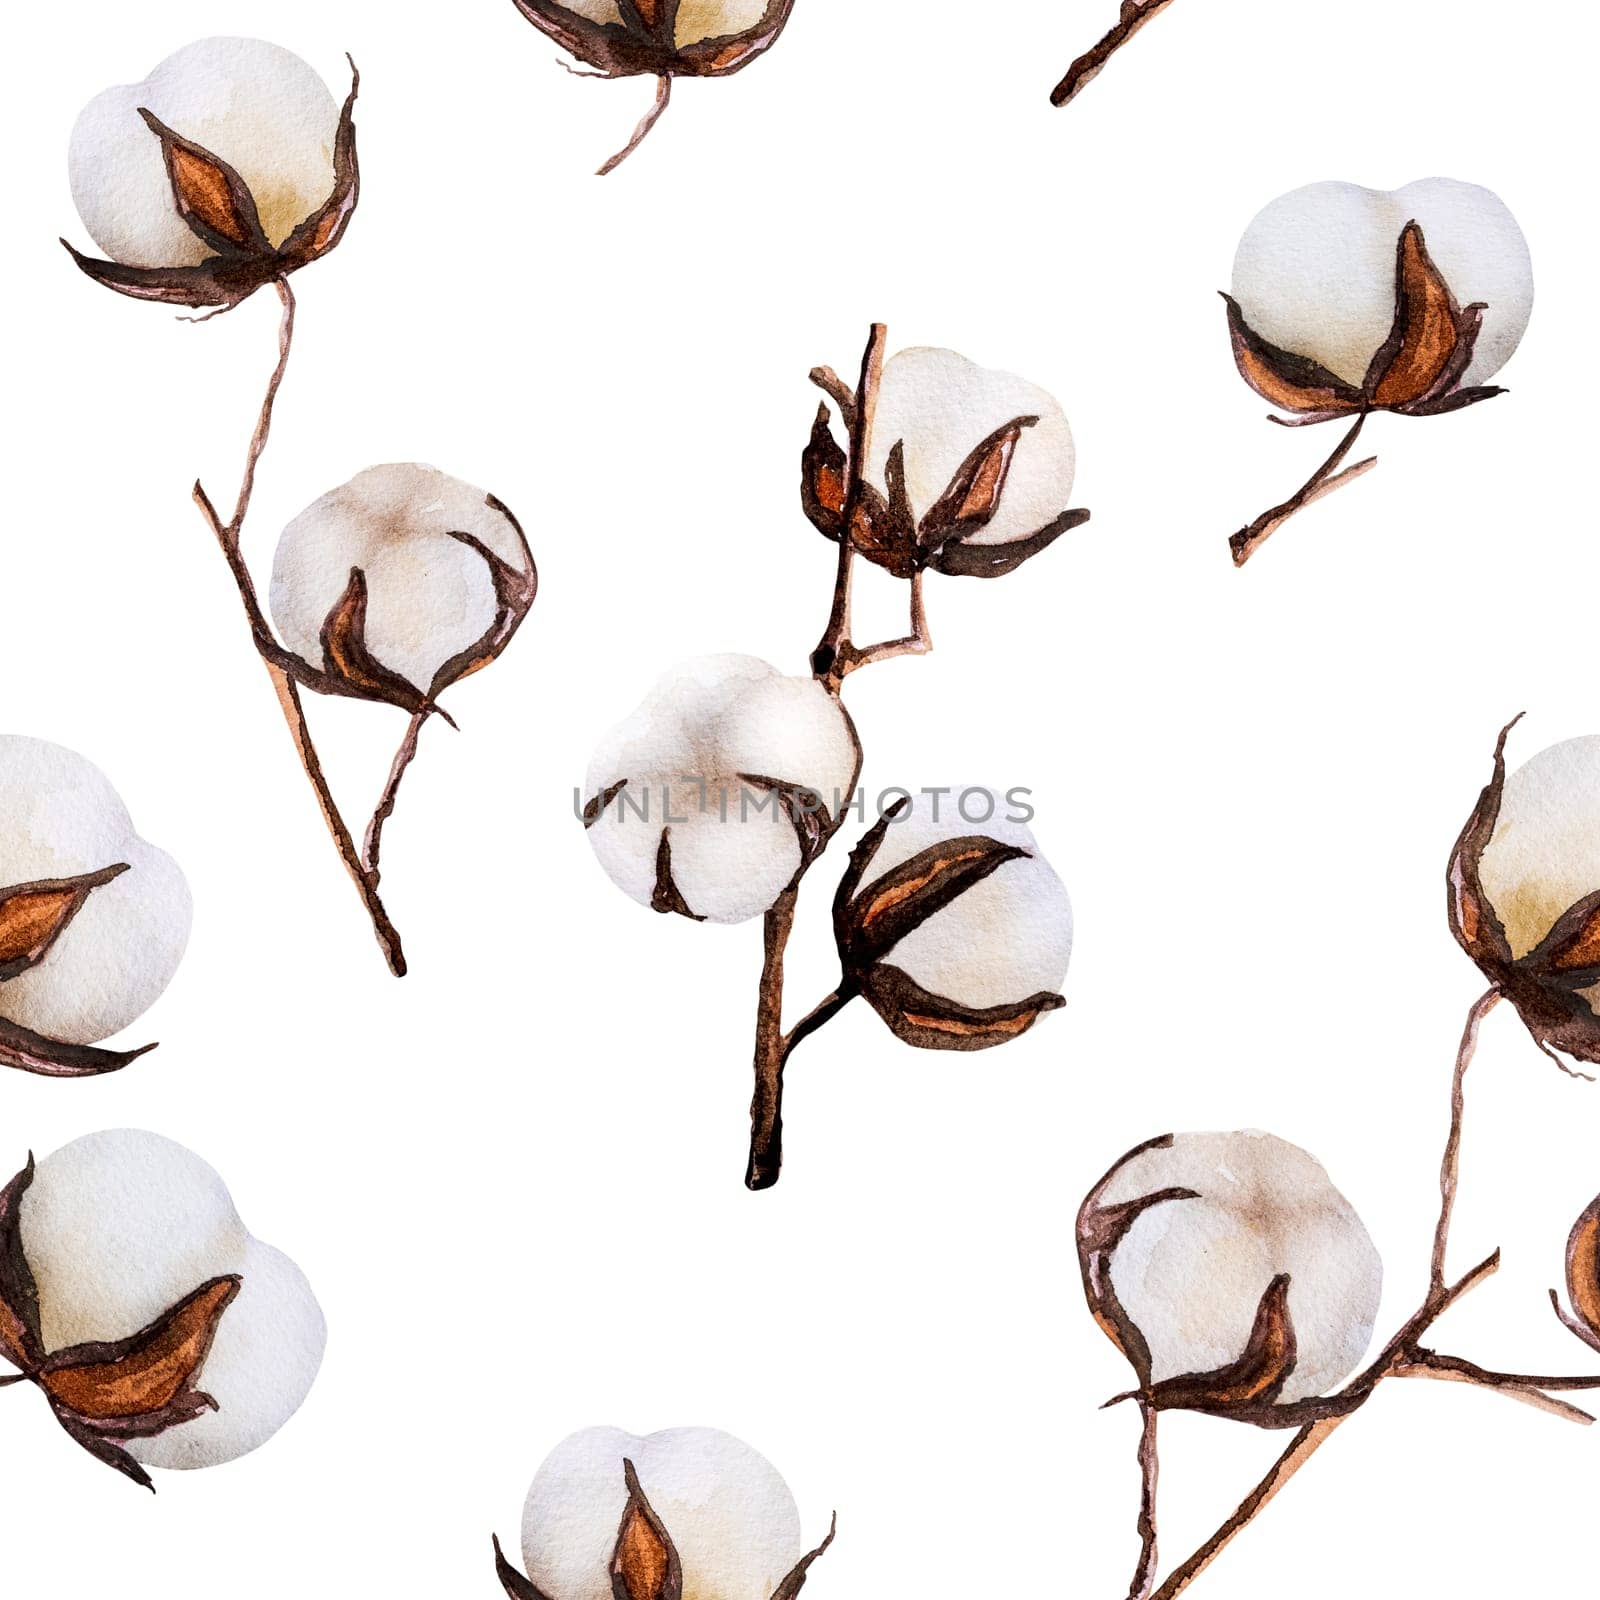 Delicate cotton bud flowers watercolor drawing seamless pattern on white background. Botanical elegant eco illustration